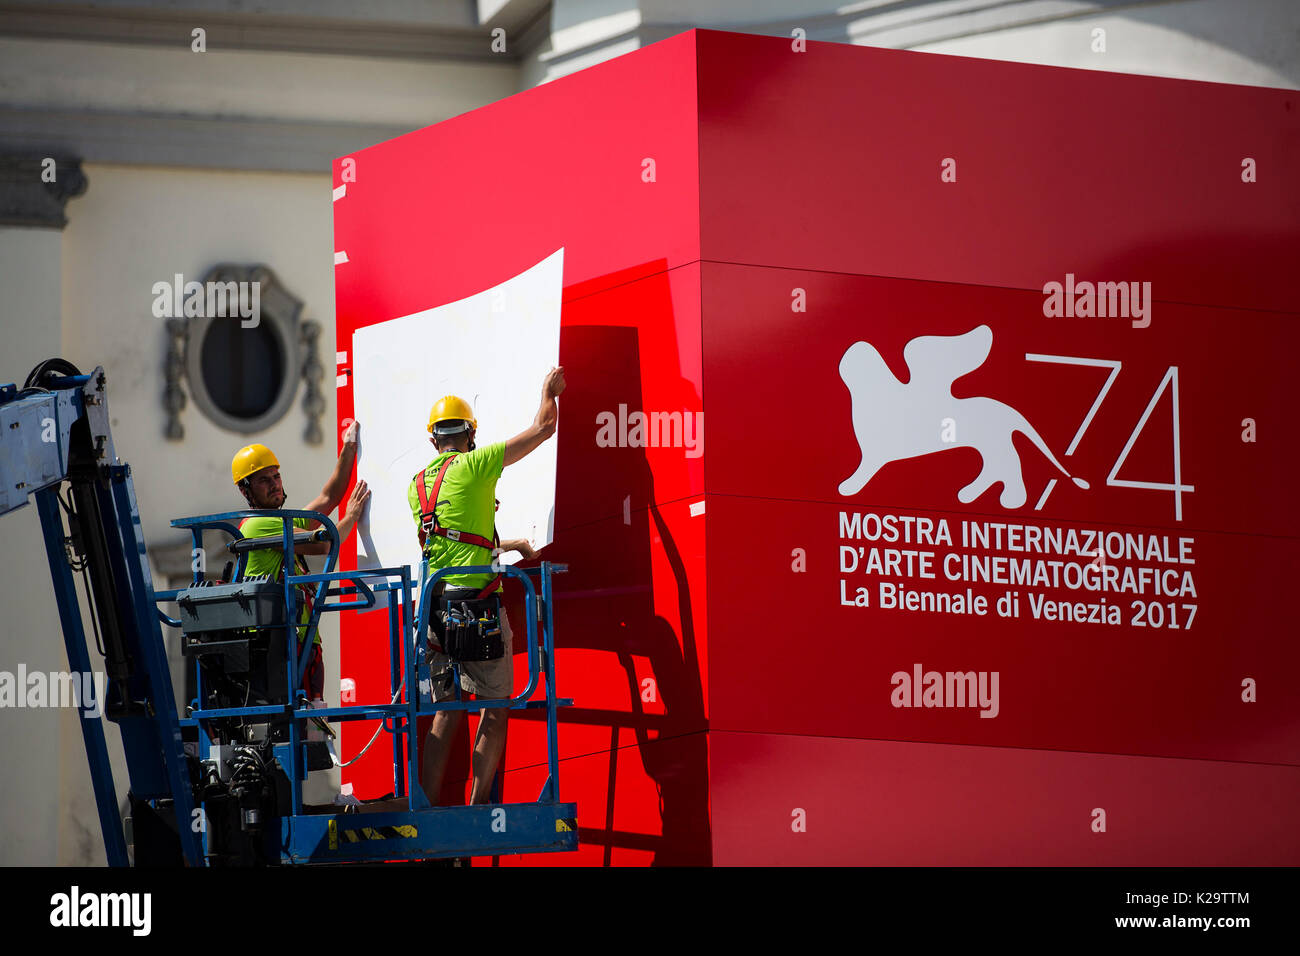 Venice, Italy. 29th Aug, 2017. Staff members complete the setup outside of the Cinema Palace prior to the start of the 74th Venice International Film Festival, in Venice, Italy, on Aug. 29, 2017. The 74th Venice Film Festival will kick off in Lido of Venice on Aug. 30 and run until Sept. 9. Credit: Jin Yu/Xinhua/Alamy Live News Stock Photo